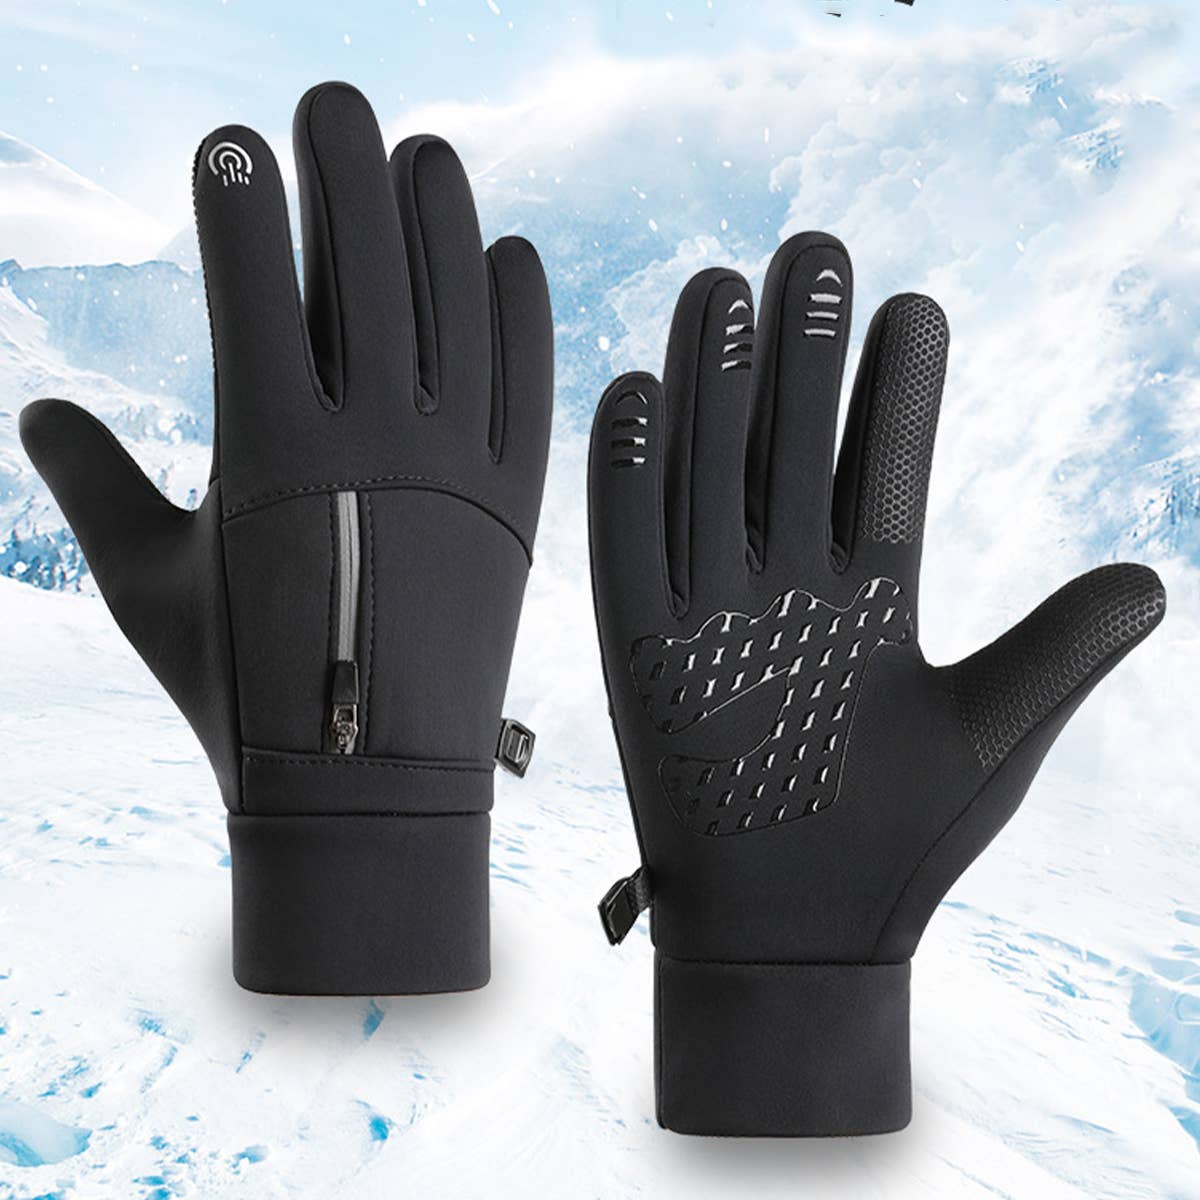 WINTER OUTDOOR TOUCH SCREEN WATERPROOF GLOVES_CWAG0043